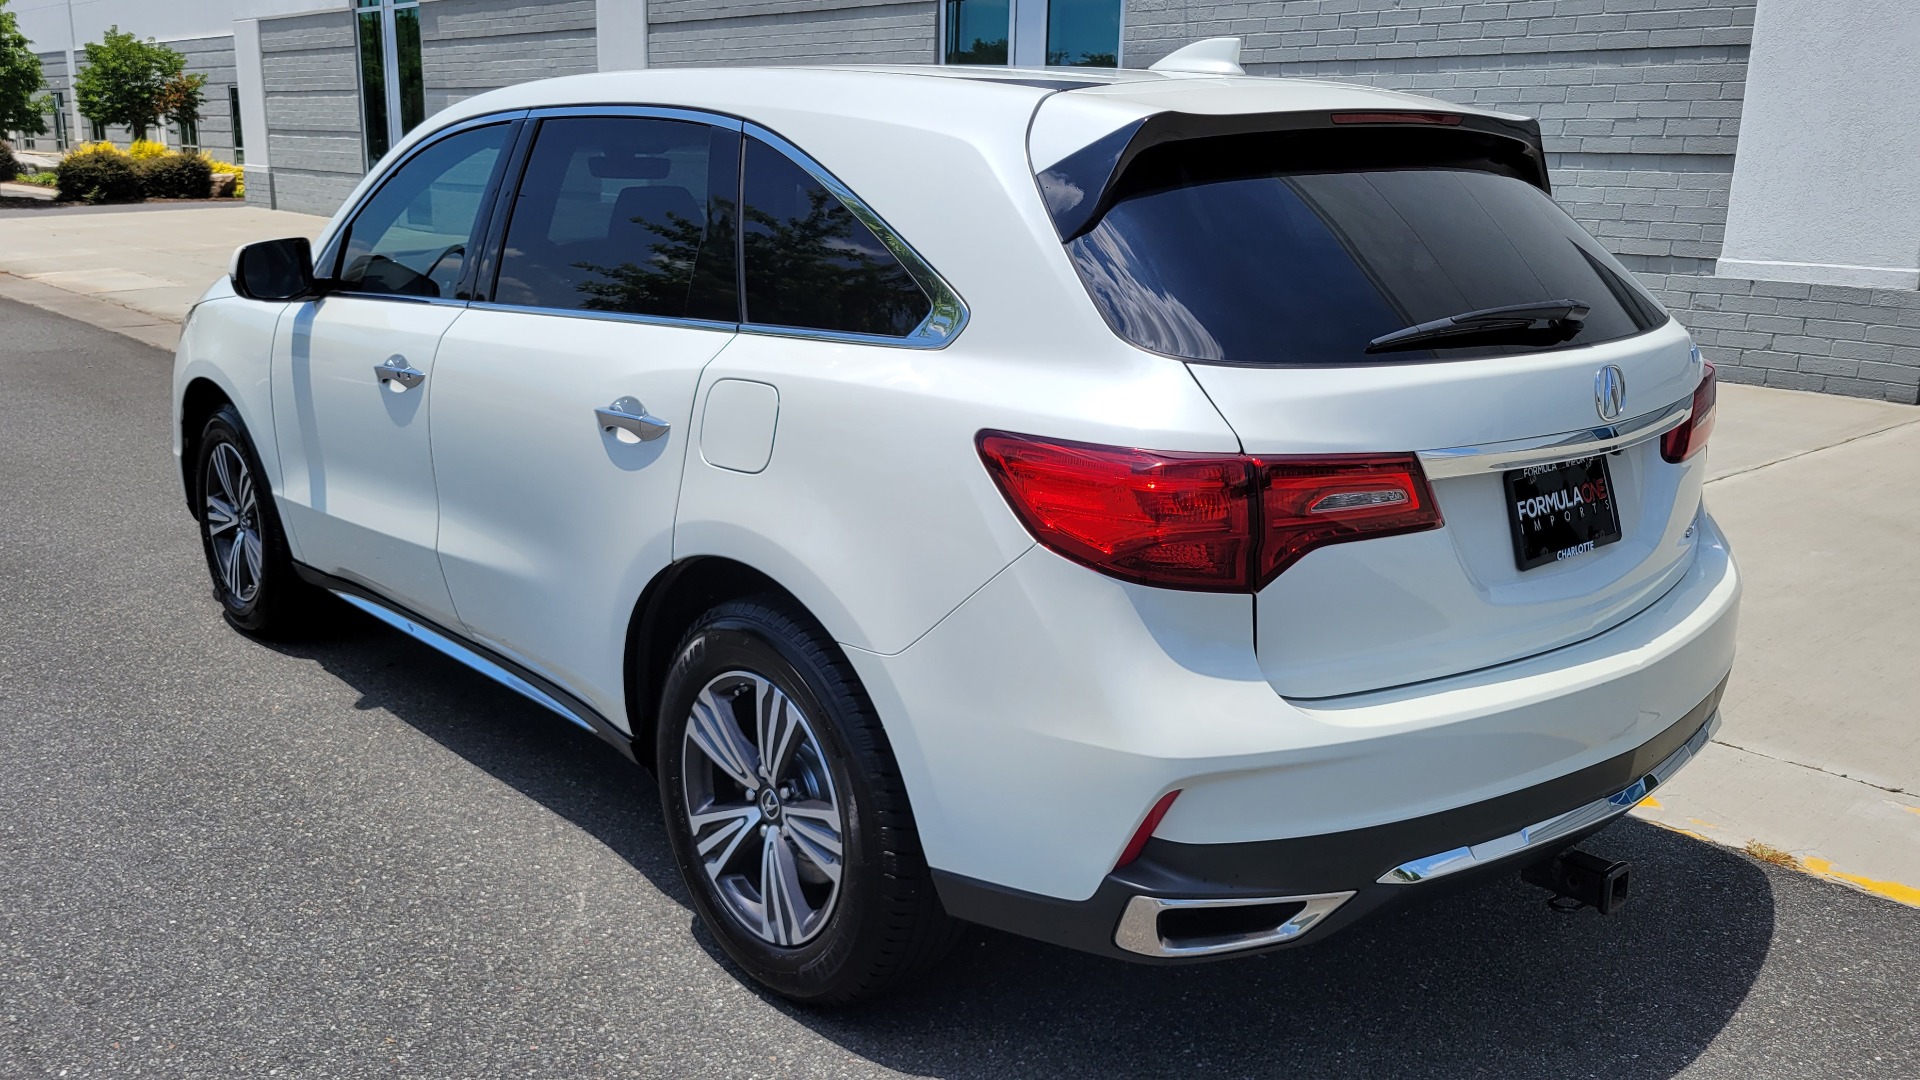 Used 2017 Acura MDX SH-AWD / 3.5L V6 / 9-SPD AUTO / SUNROOF / 3-ROW / CAMERA for sale $29,495 at Formula Imports in Charlotte NC 28227 5